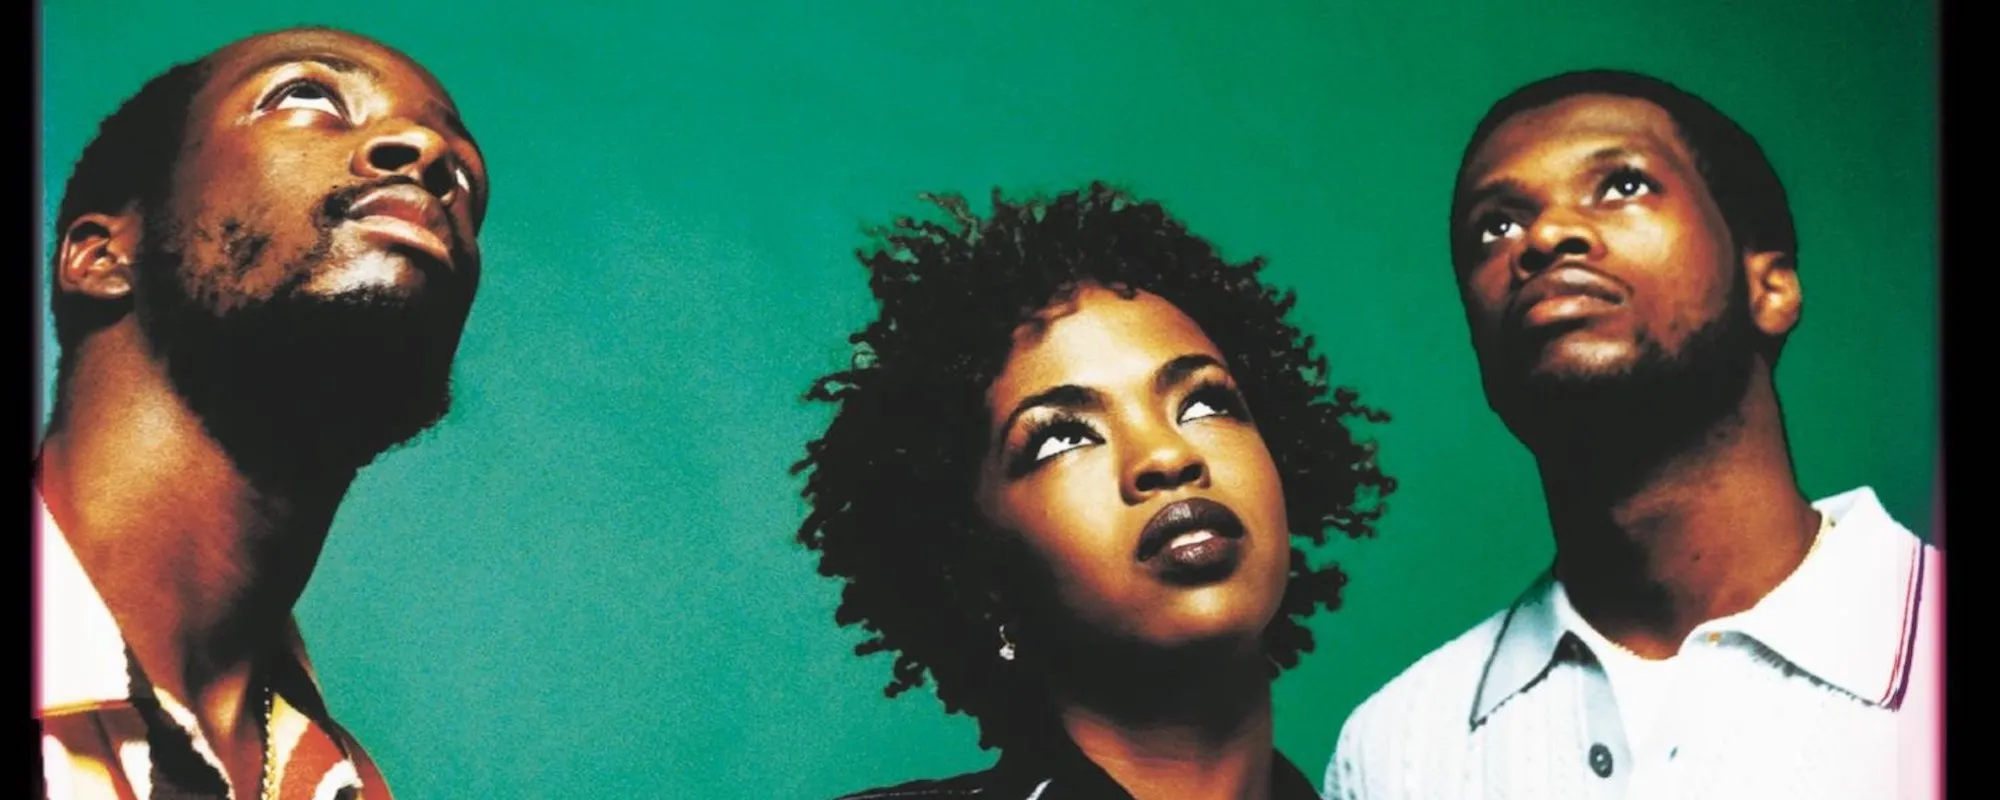 The Fugees Play First Reunion Show, Amid Some Snags